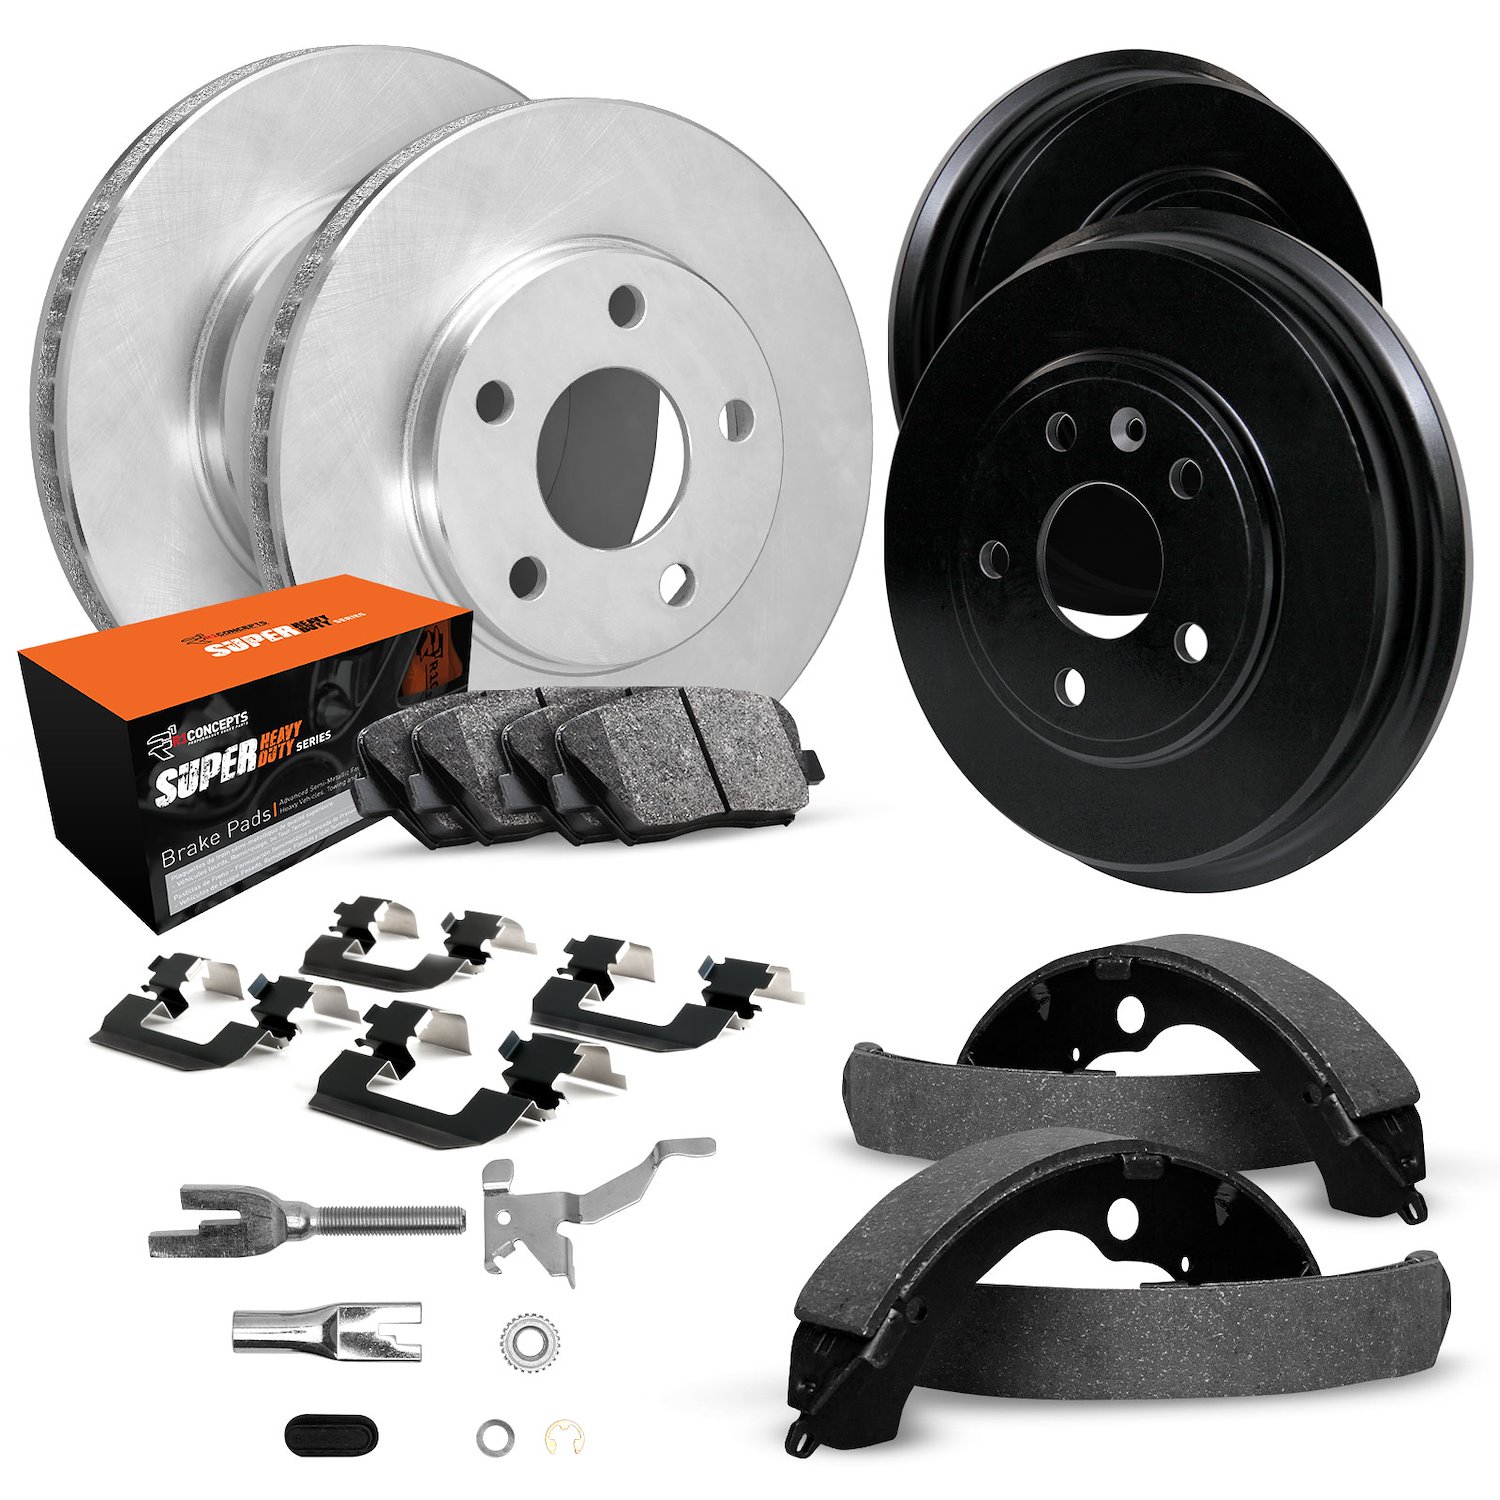 E-Line Blank Brake Rotor & Drum Set w/Super-Duty Pads, Shoes, Hardware, & Adjusters, 1996-2002 GM, Position: Front & Rear